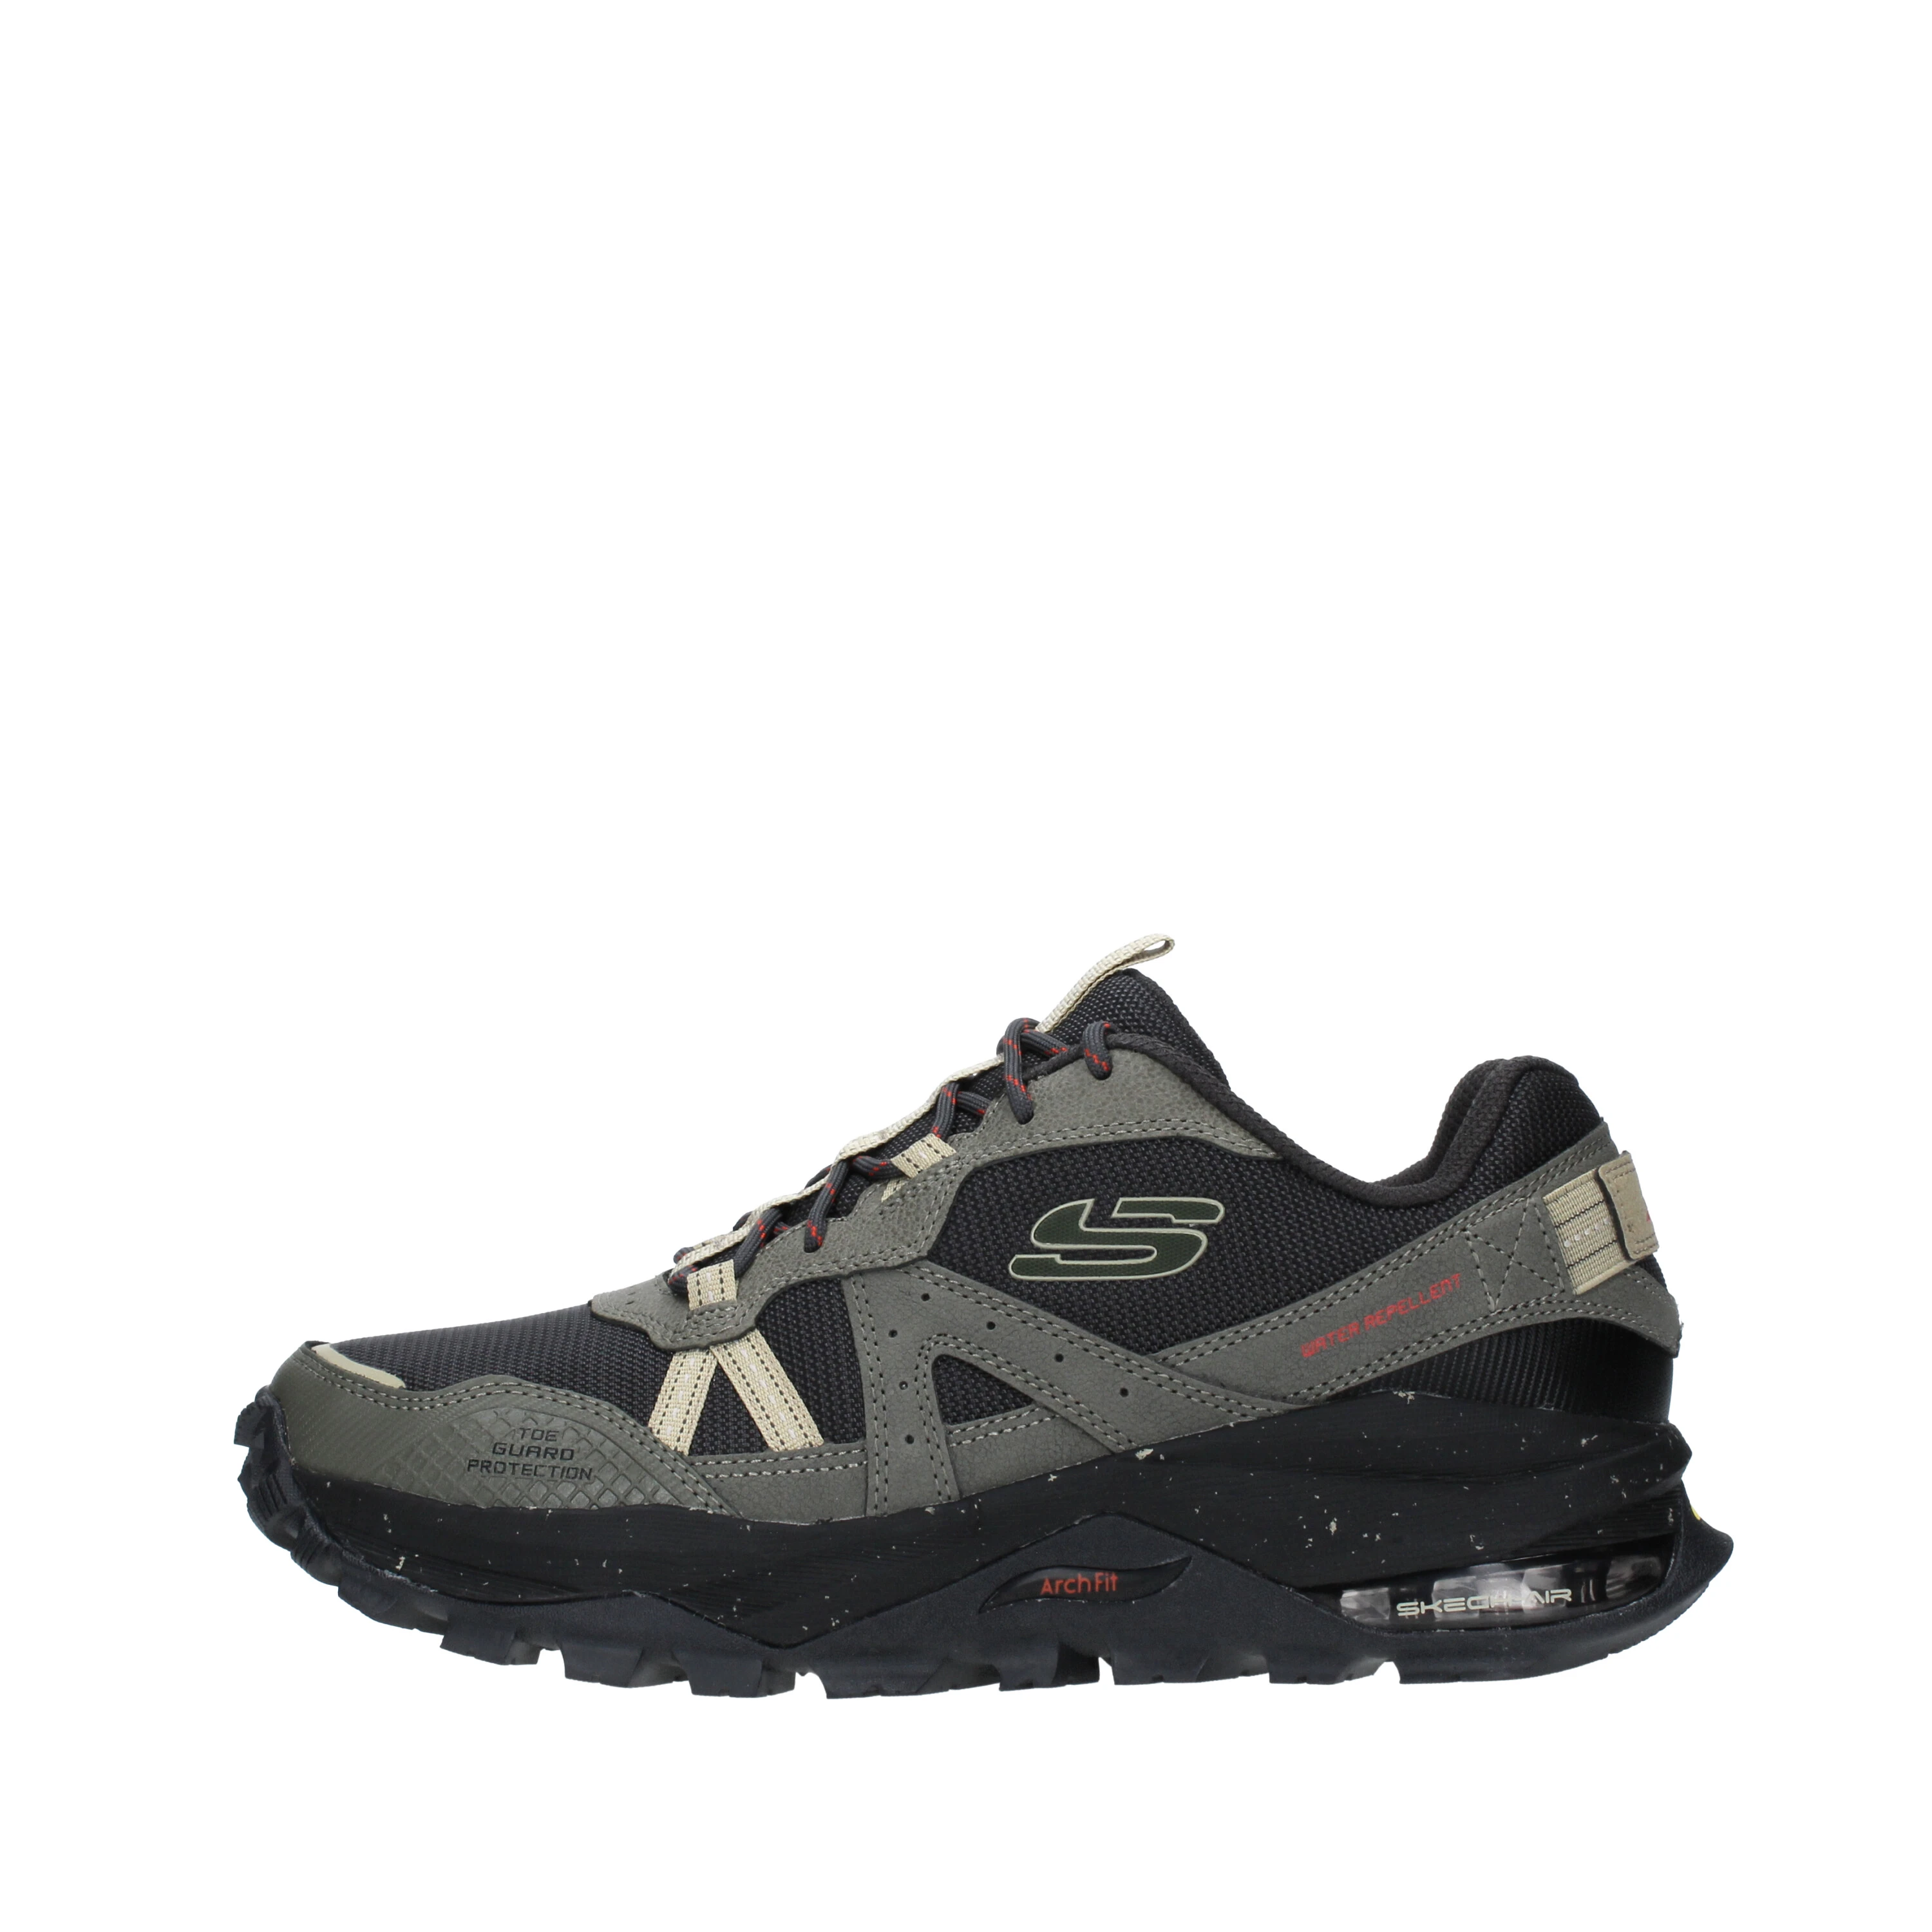 SNEAKERS ARCH FIT TRAIL AIR UOMO VERDE NERO